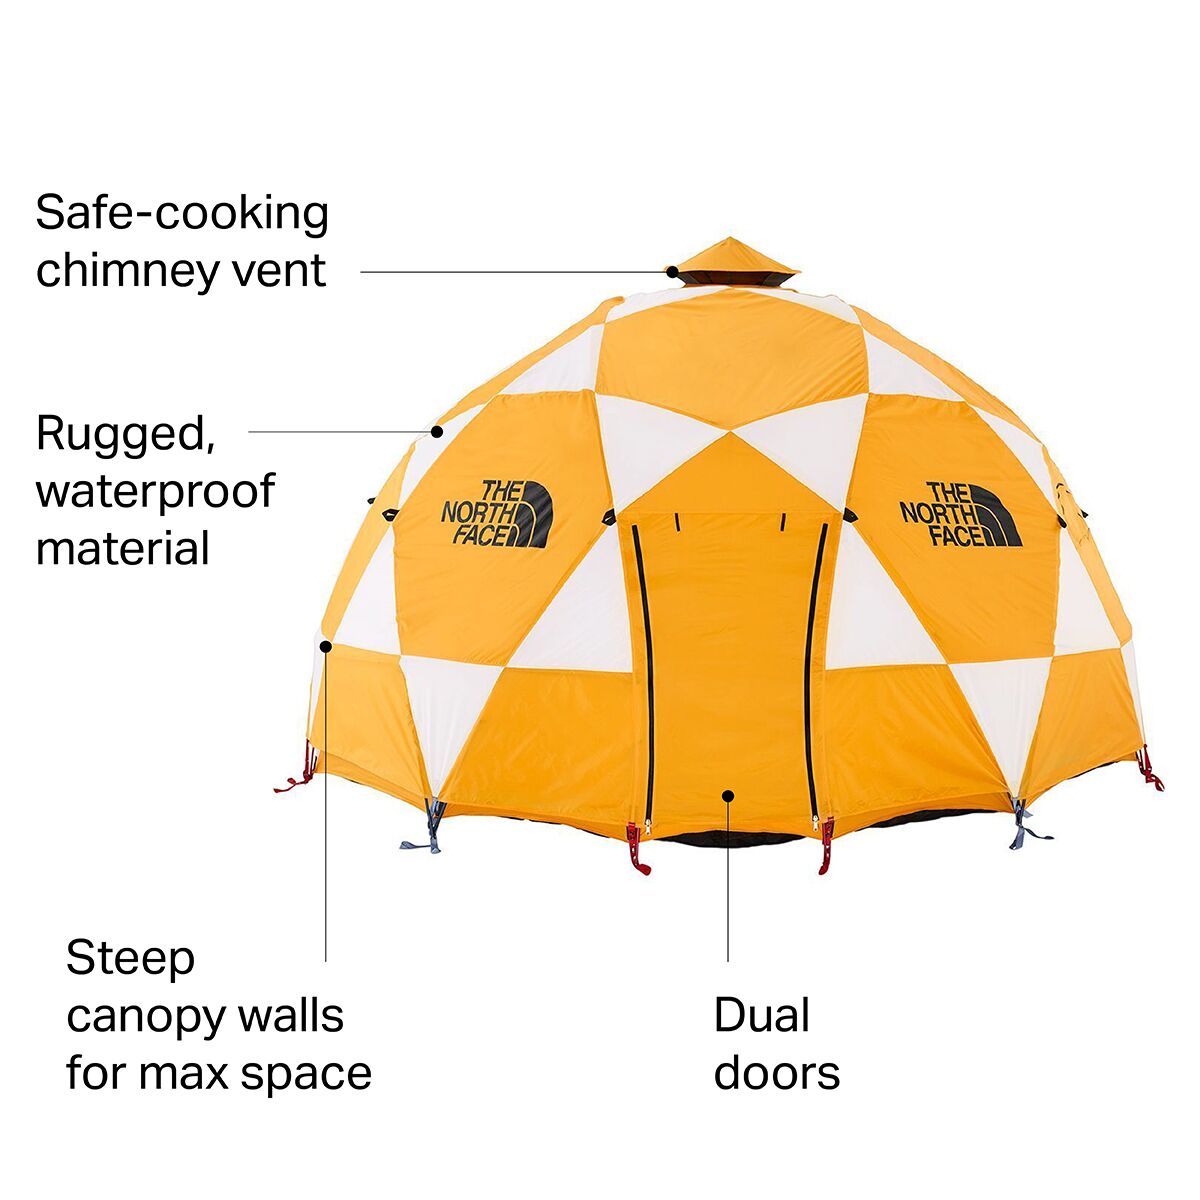 The North Face 2-Meter Dome Tent: 8-Person 4-Season - Hike & Camp